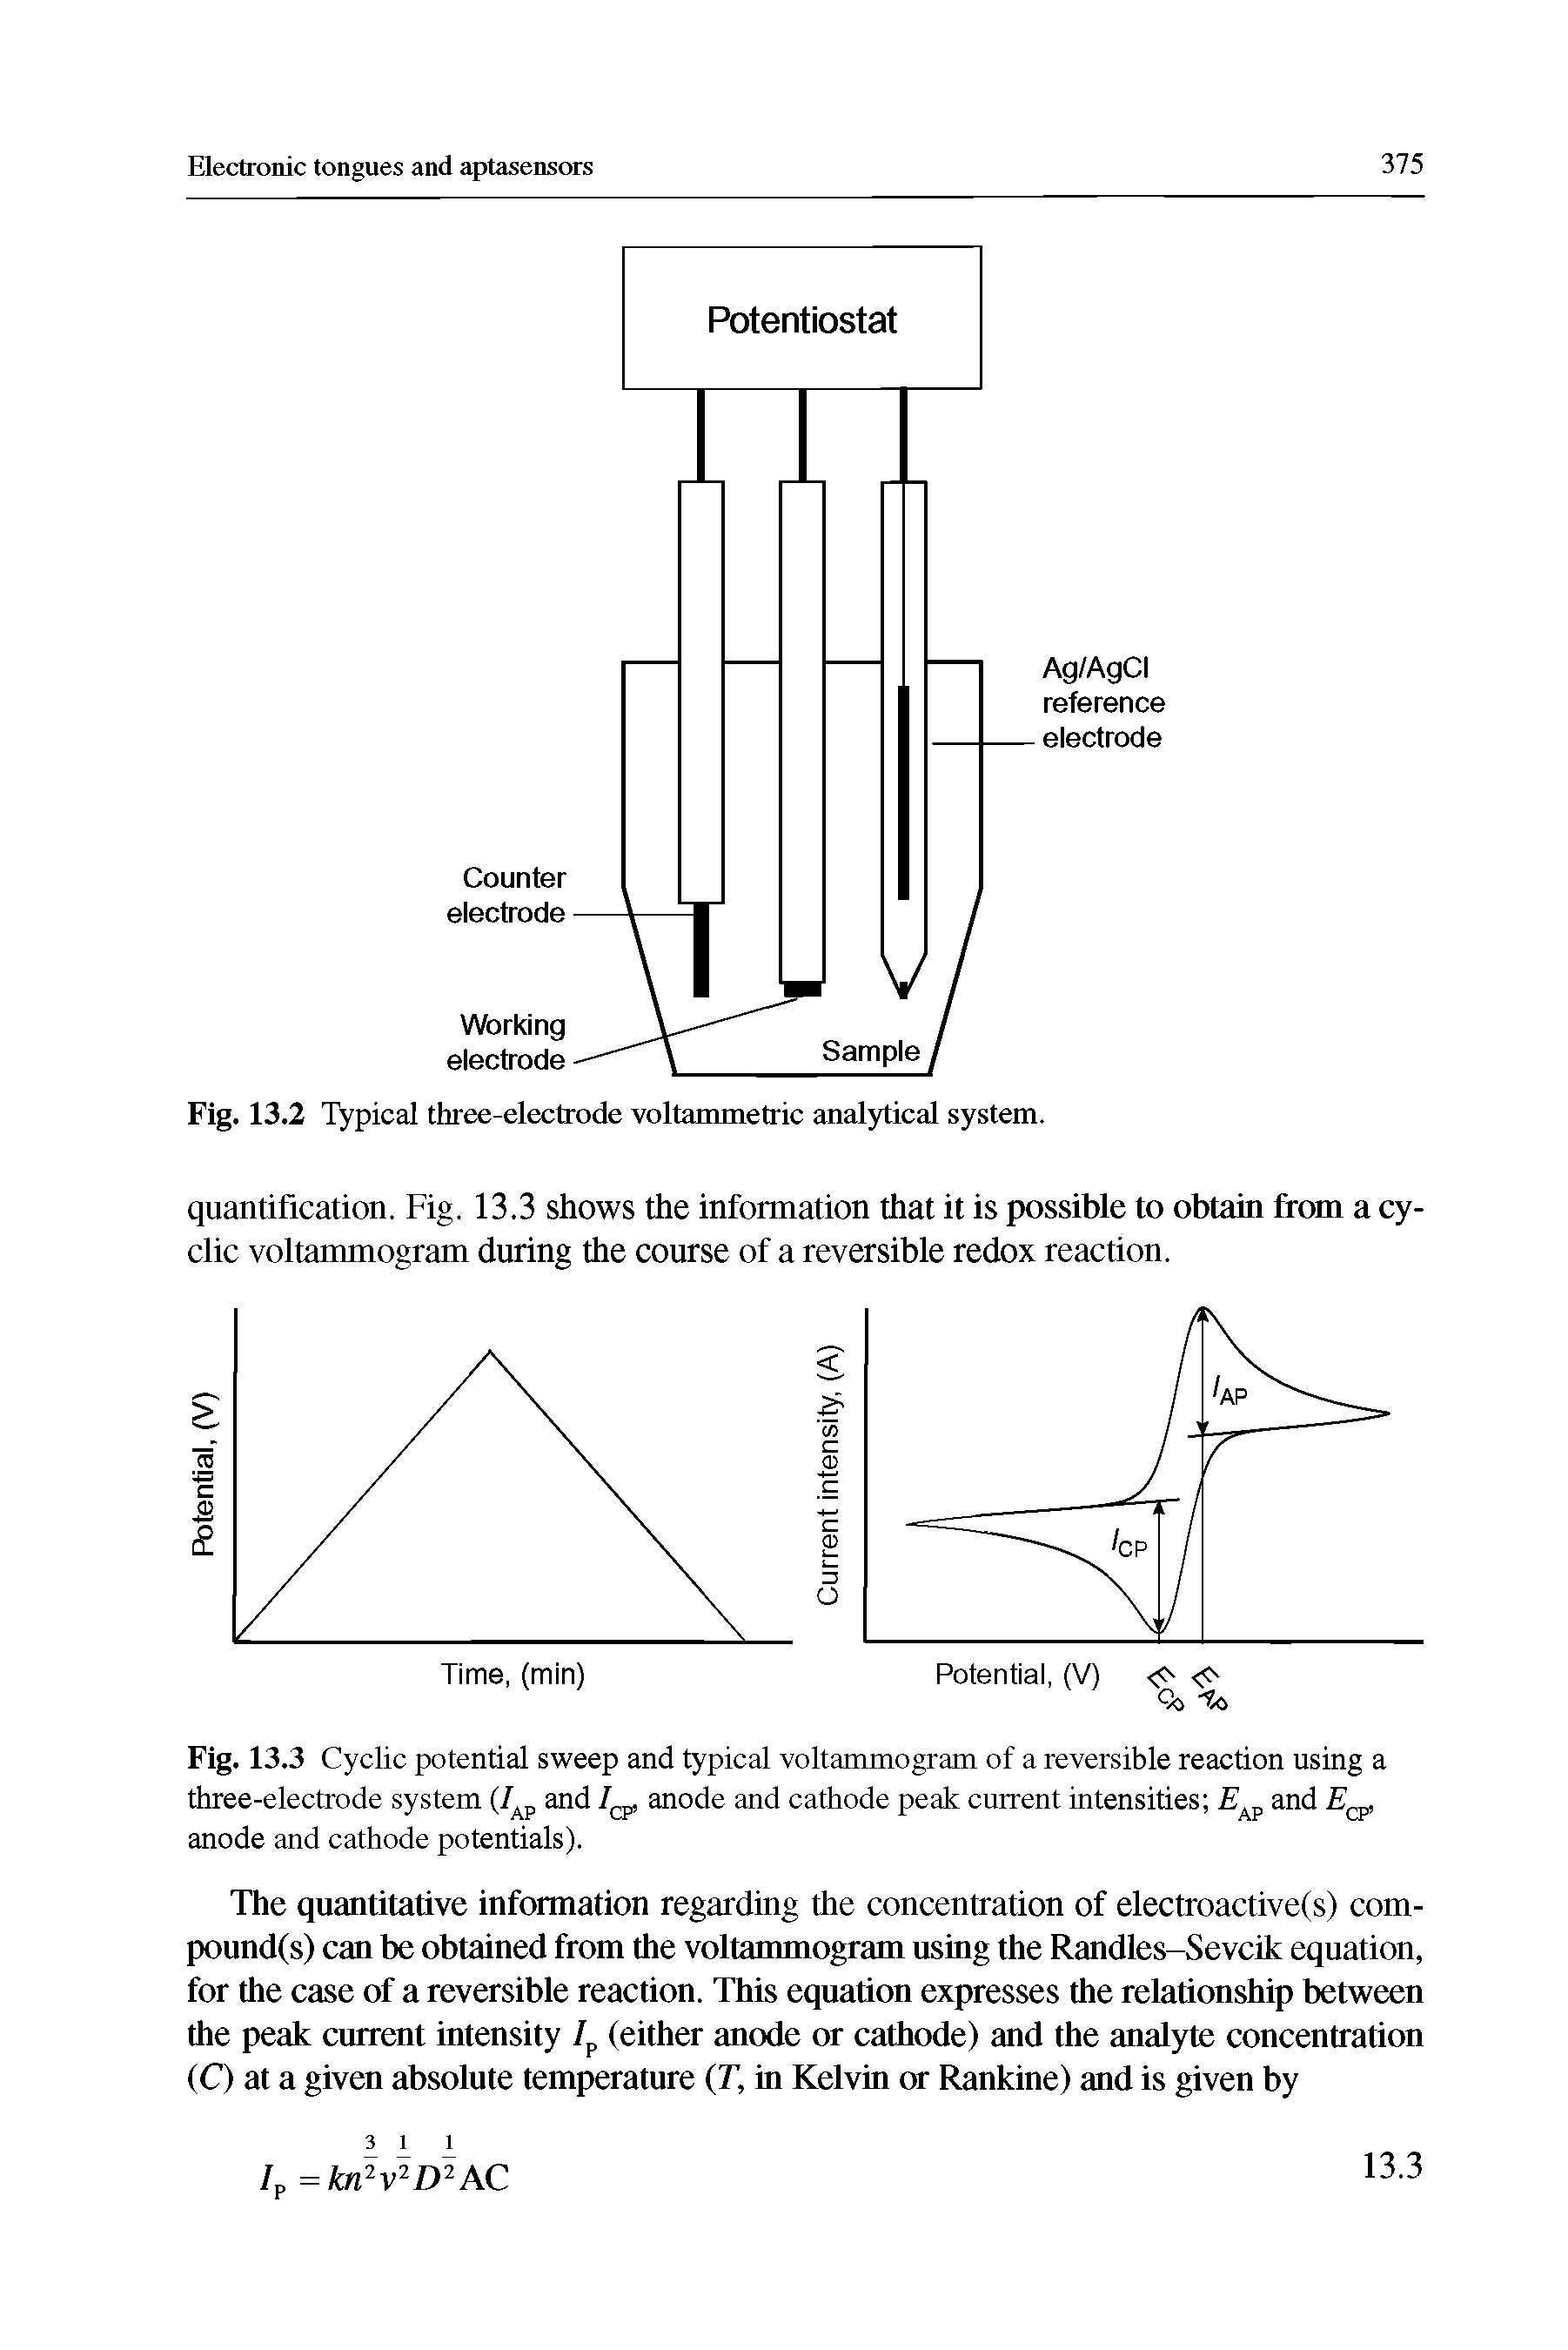 Fig. 13.2 Typical three-electrode voltammetric analytical system.